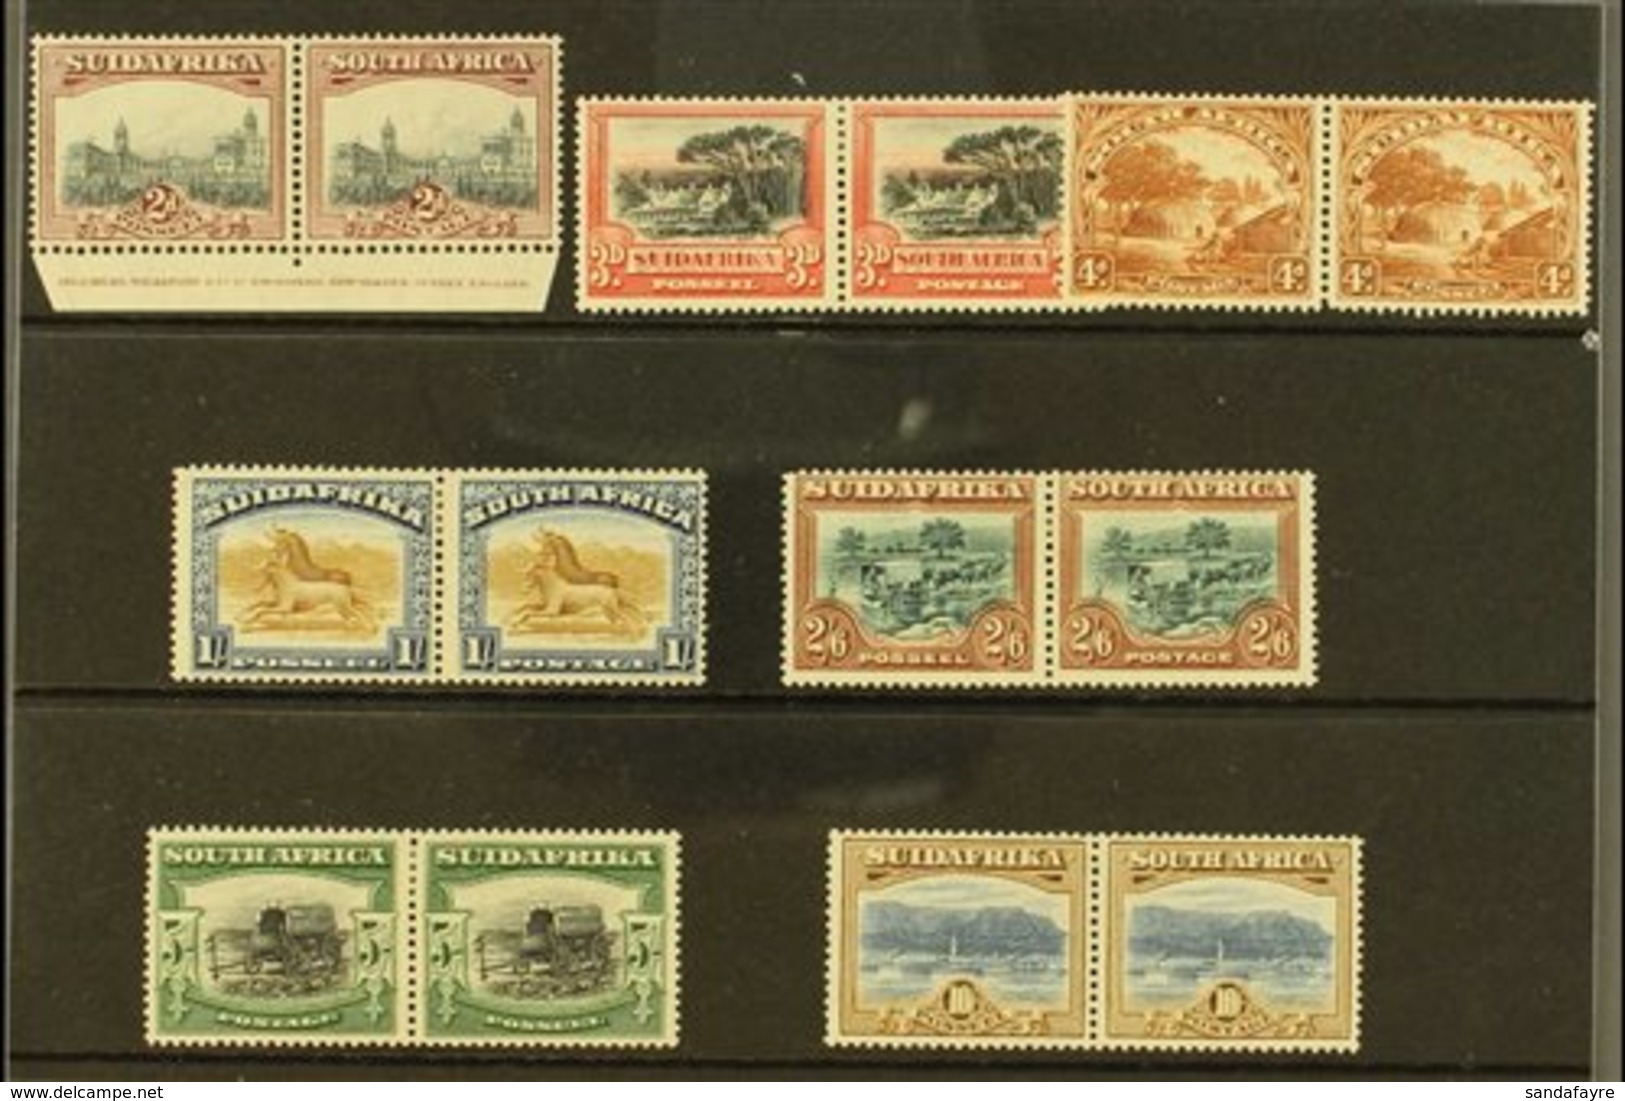 1927-30 Pictorials Complete Set, SG 34/39, Very Fine Mint Horizontal Pairs, Very Fresh & Attractive. (7 Pairs = 16 Stamp - Unclassified